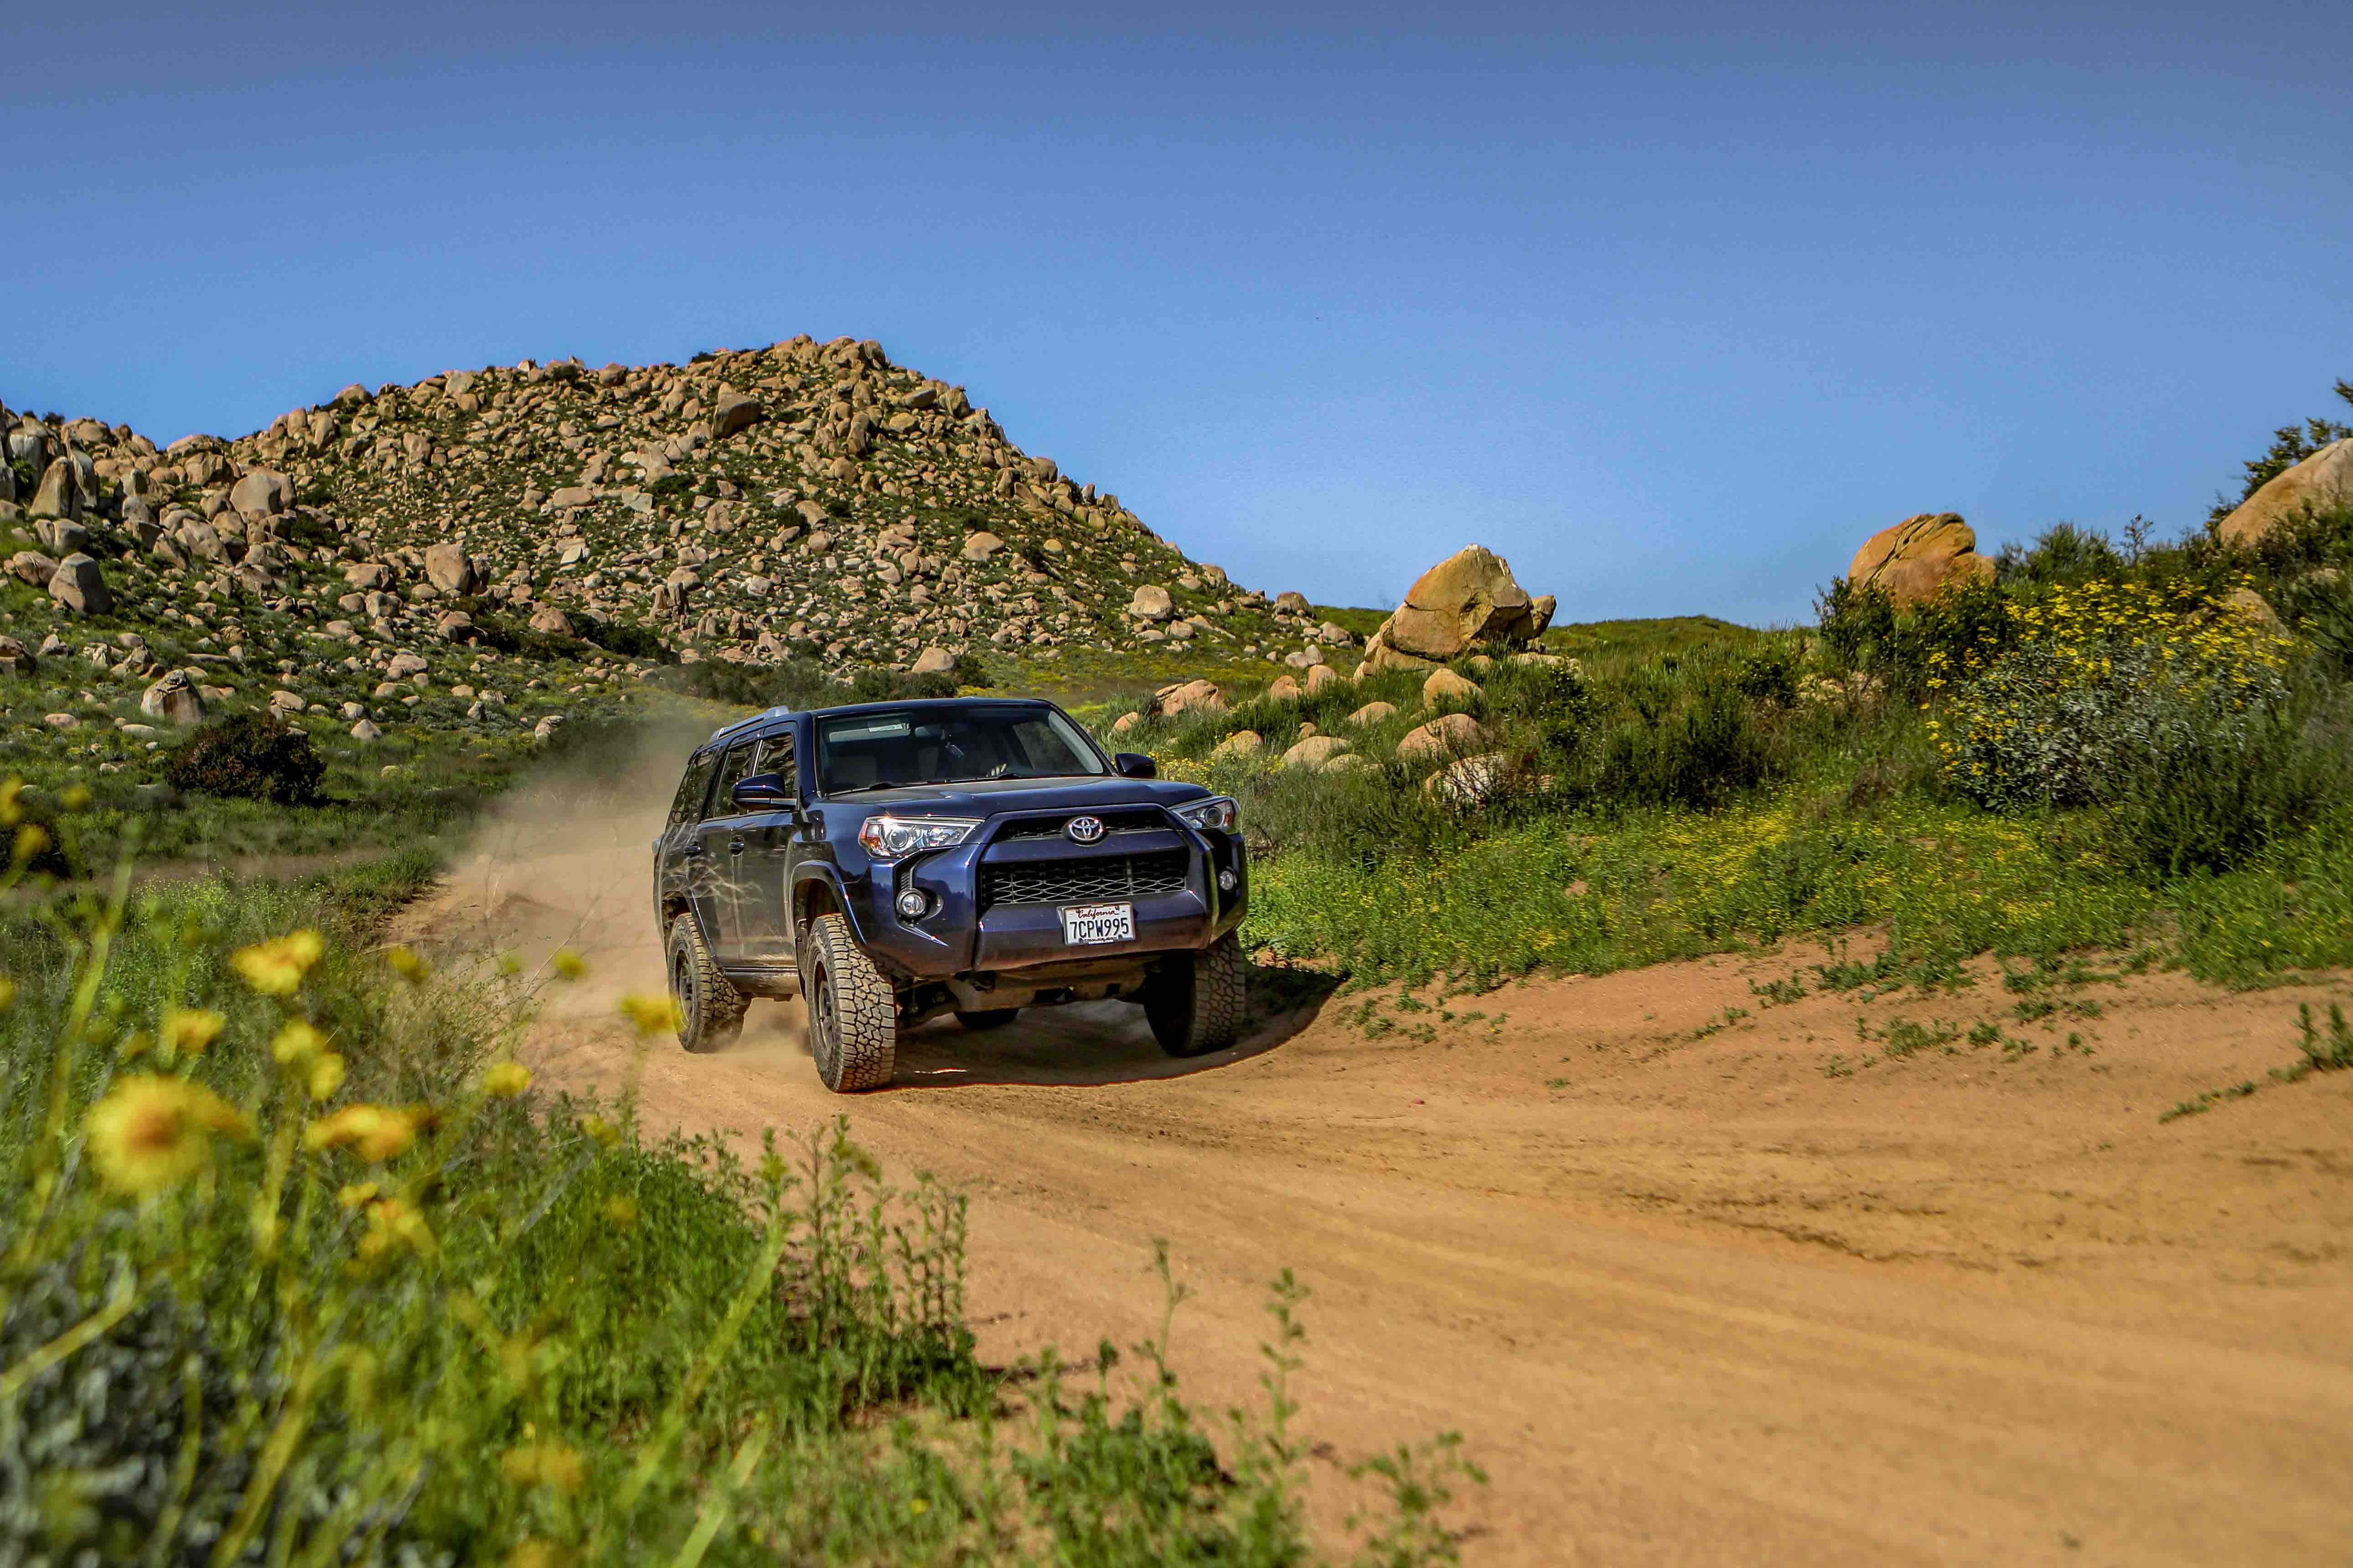 R1 Concepts Equipped Toyota 4Runner in an off road test drive.